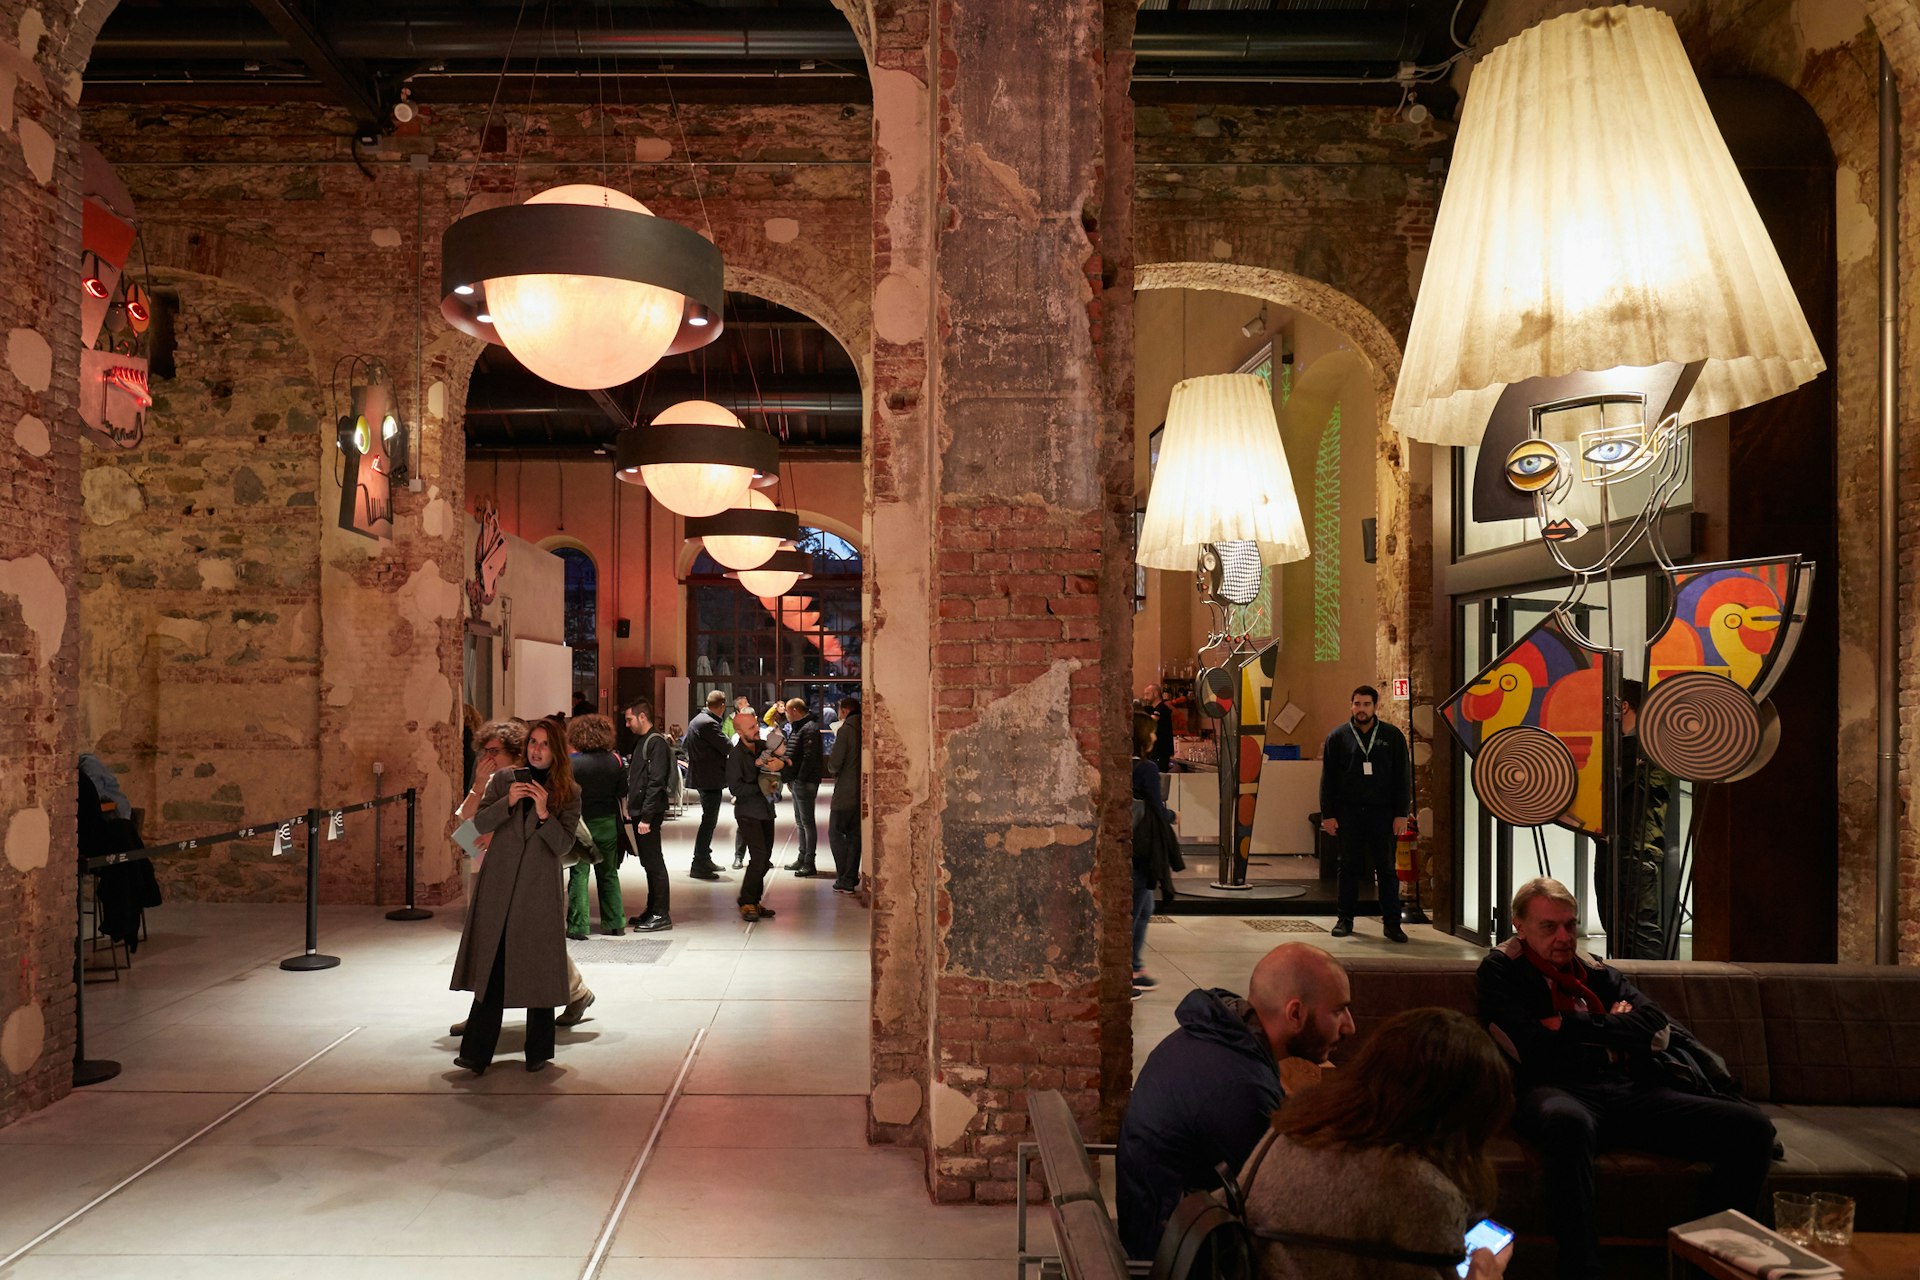 The interior of Officine Grandi Riparazioni with people moving around looking at displays of modern art